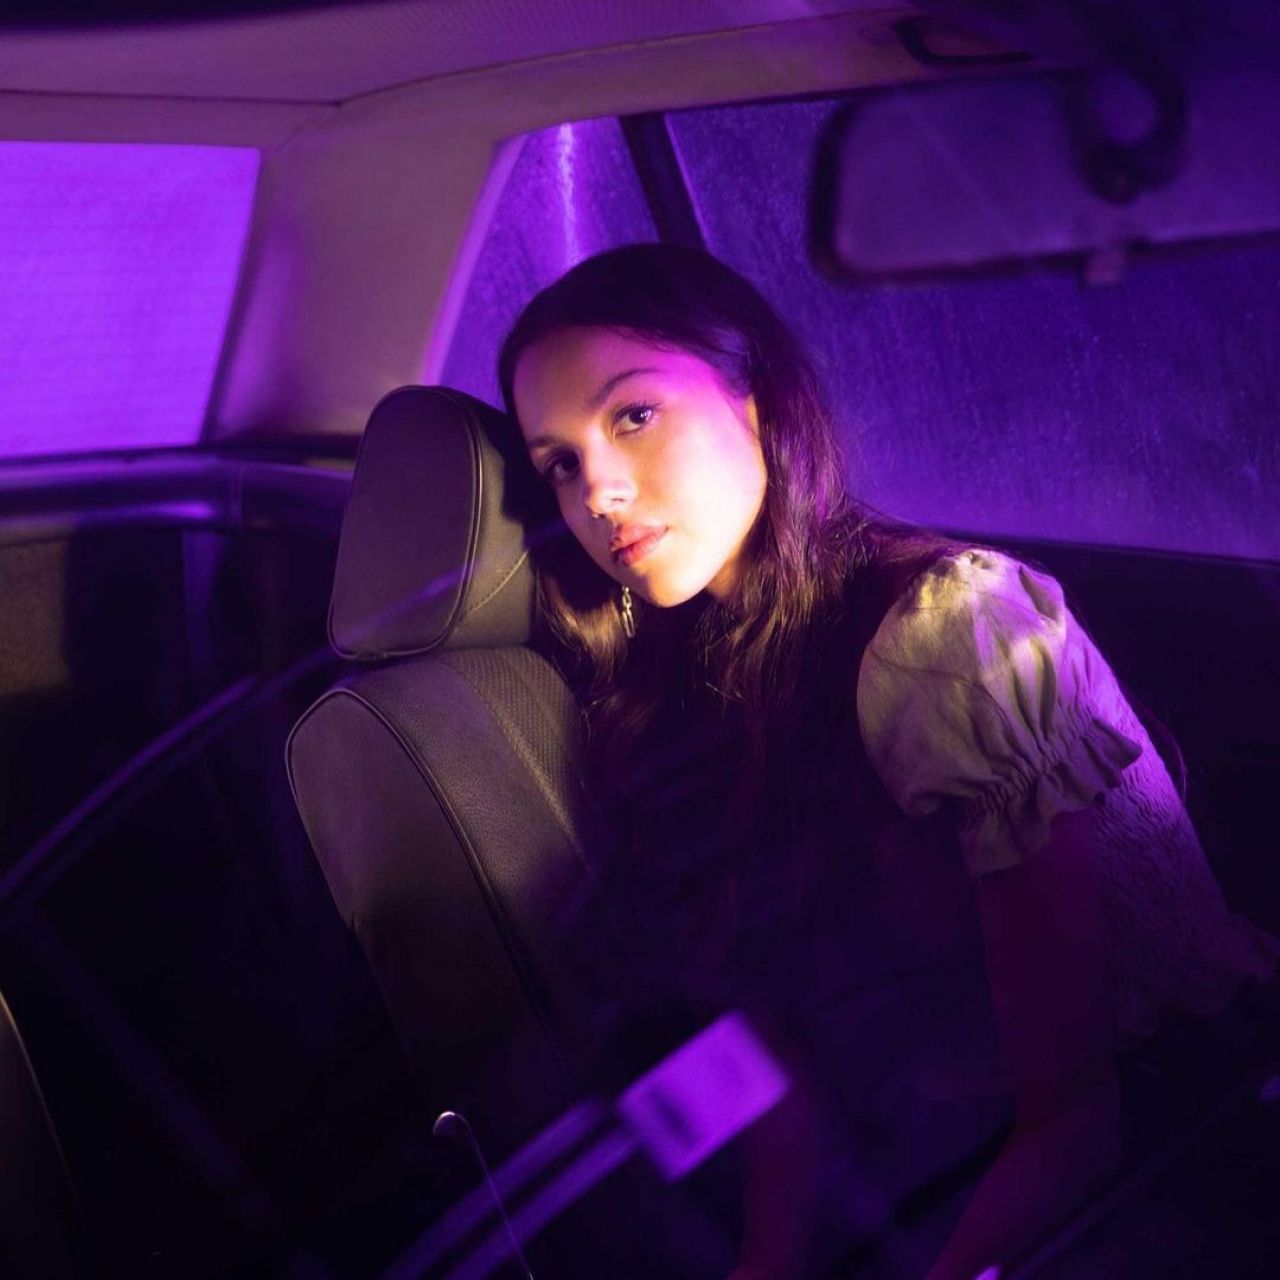 Olivia Rodrigo Offers A Tender Performance Of ‘Drivers License’ For The